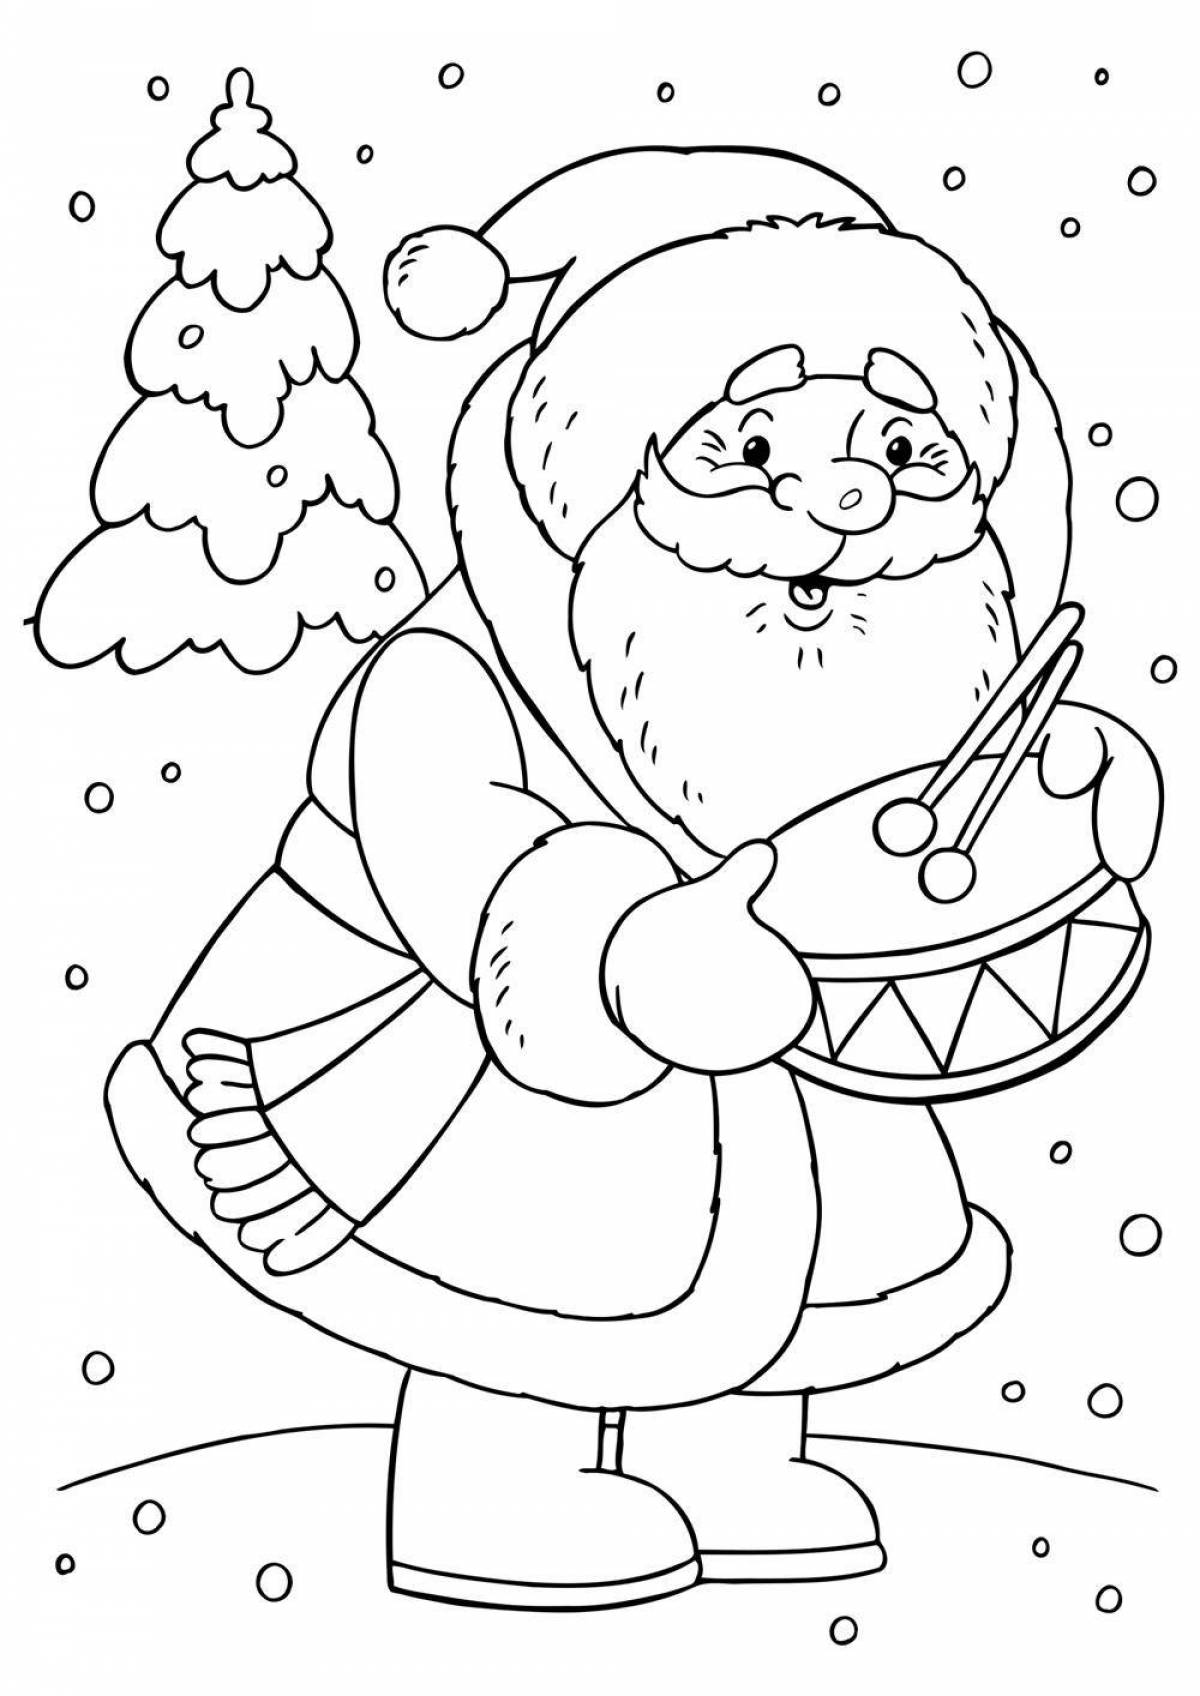 Outstanding Christmas coloring book for kids